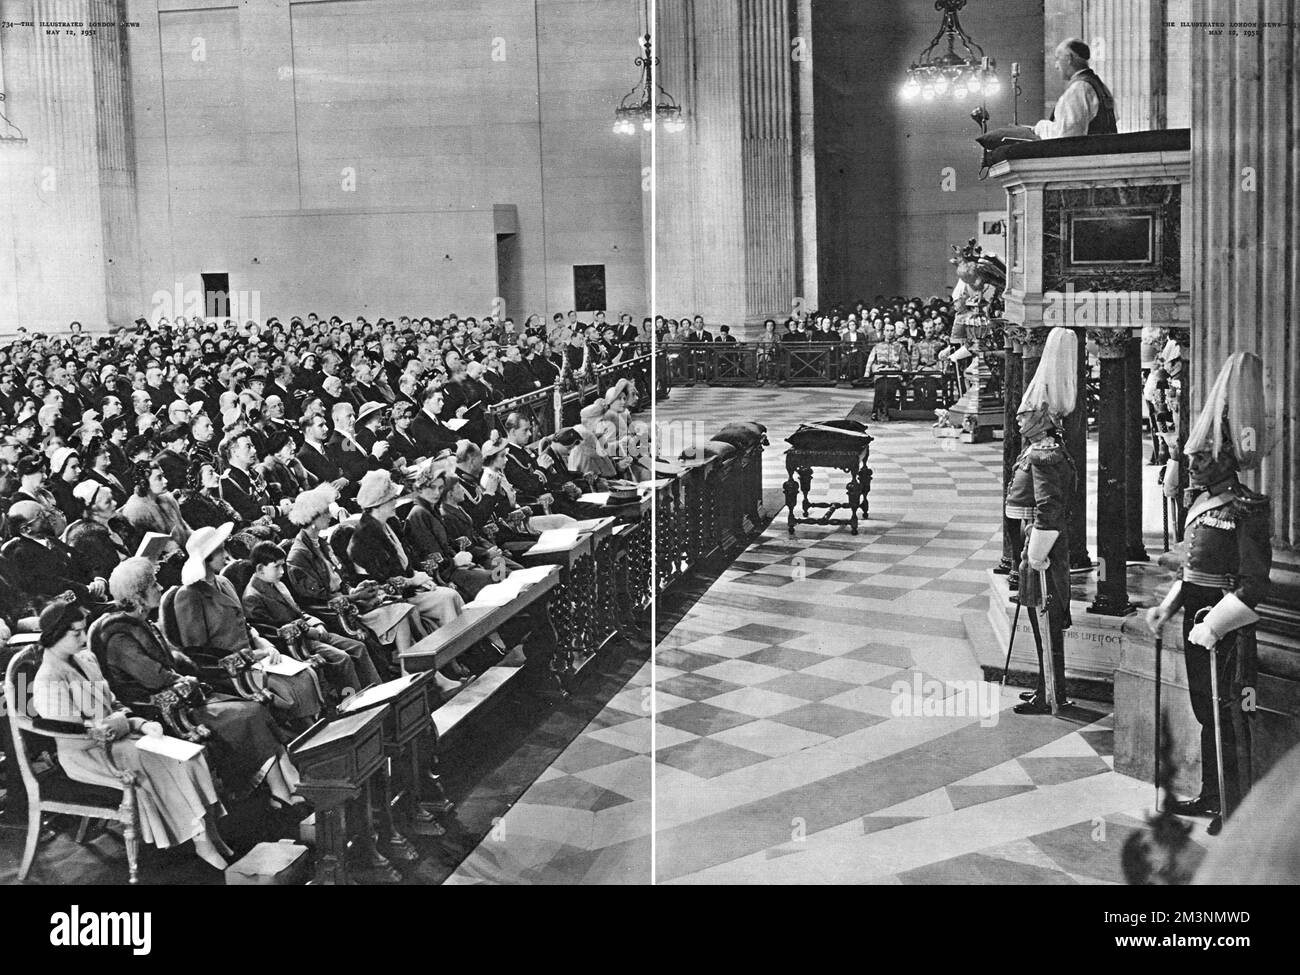 Festival of Britain service of dedication, St Paul's Cathedral, London.  The Archbishop of Canterbury, Dr Fisher, speaks from the pulpit.  The congregation includes members of the royal family -- King George VI and Queen Elizabeth, Queen Mary, Princess Elizabeth and the Duke of Edinburgh, and Princess Margaret.       Date: 3 May 1951 Stock Photo